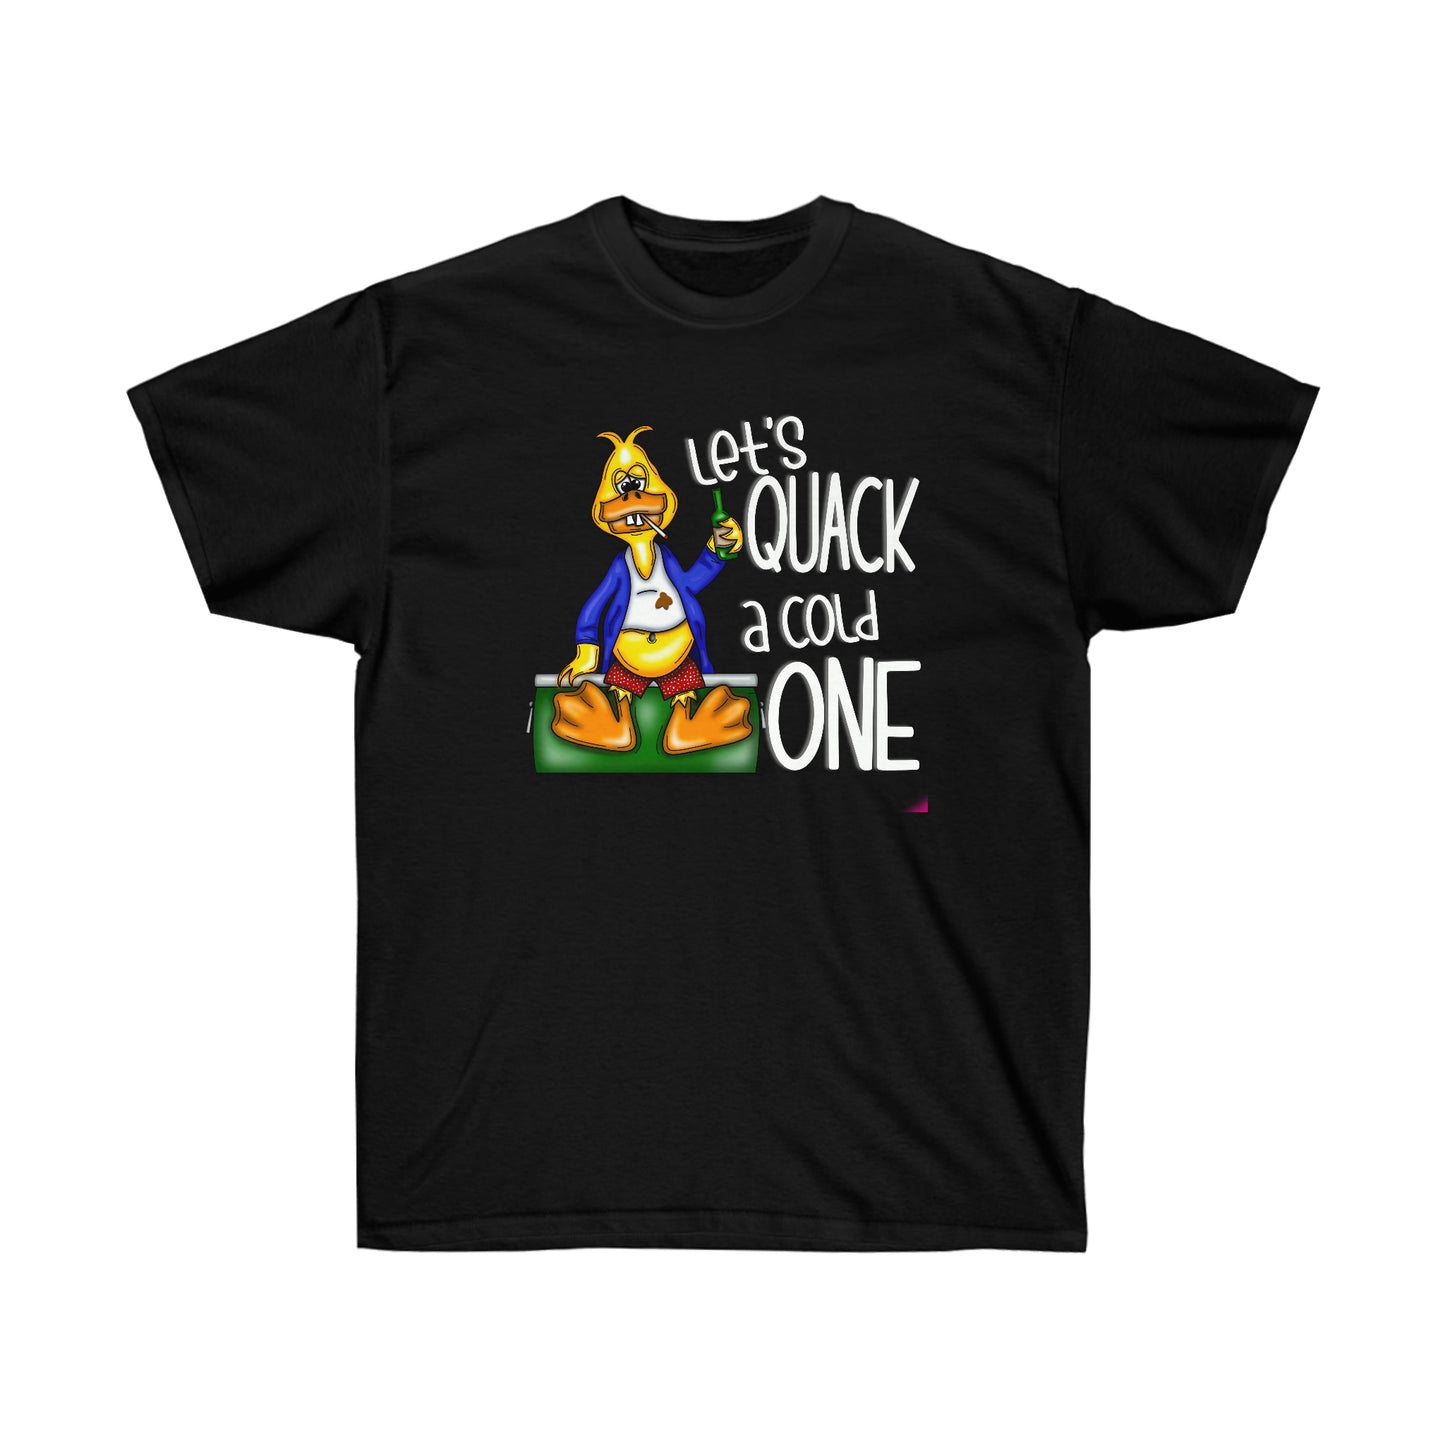 Let’s Quack a cold one